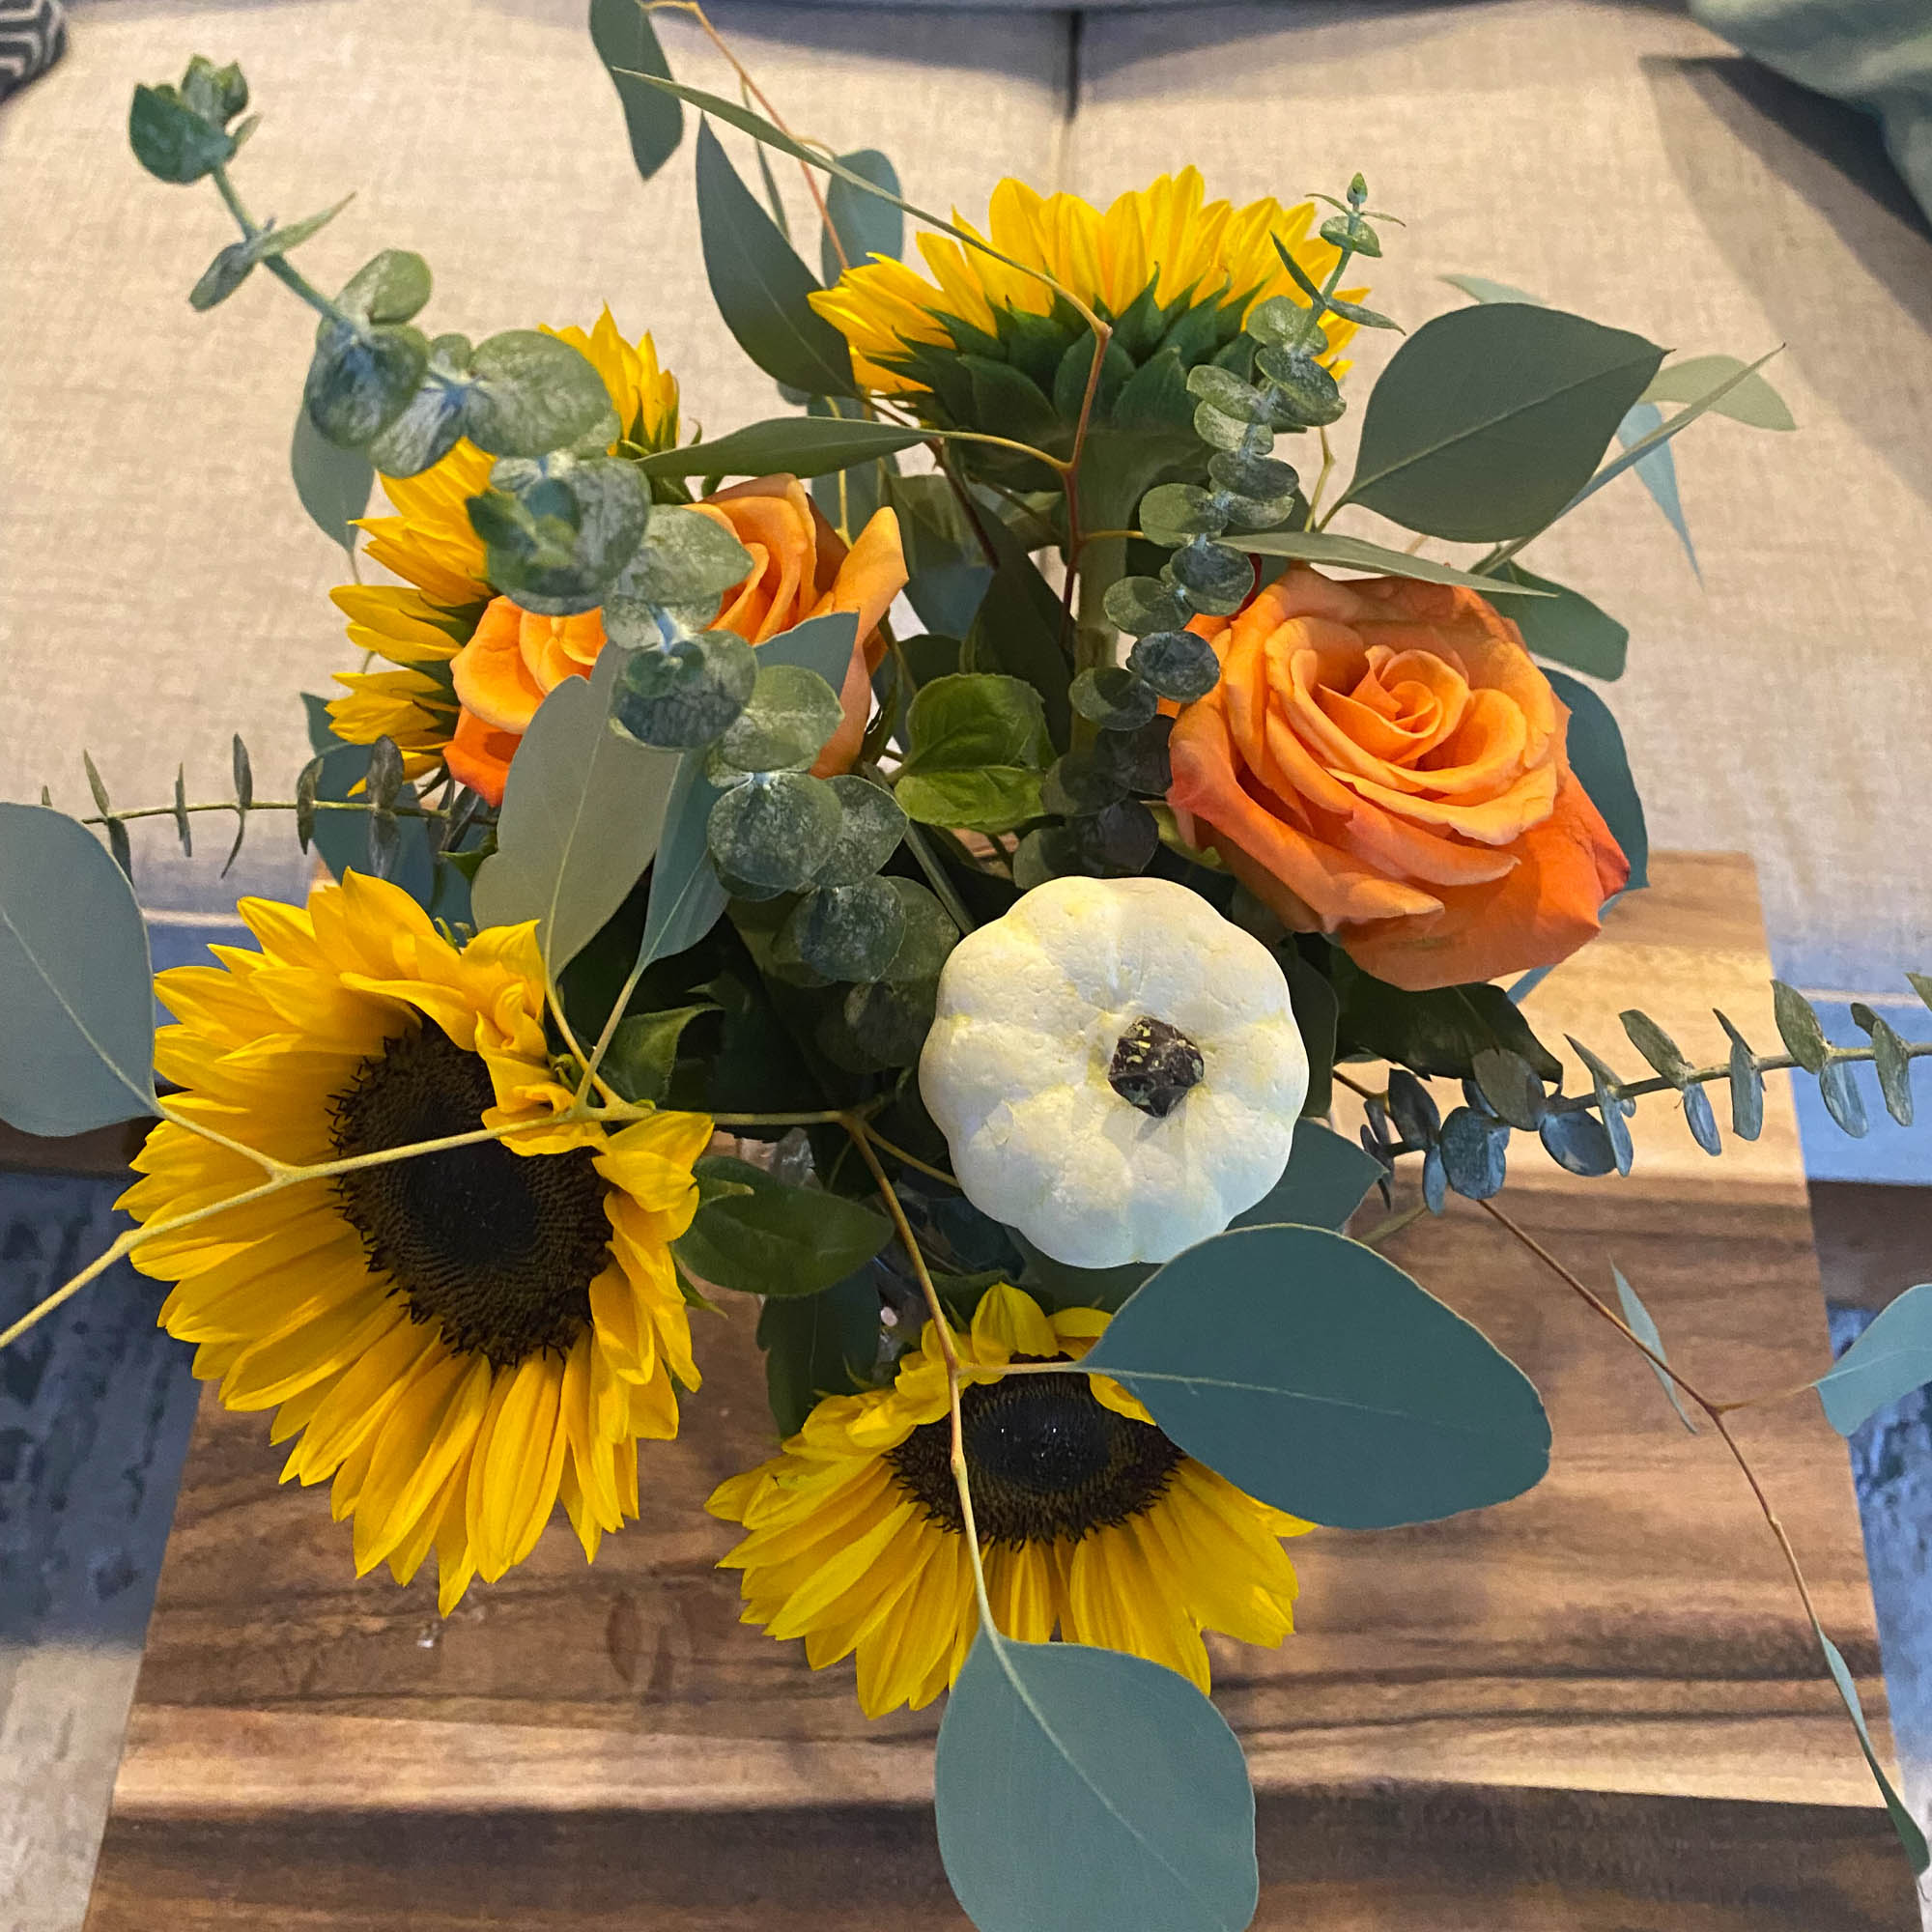 Flower arrangement in a glass vase on a wooden coffee table, with sunflowers and pumpkins.